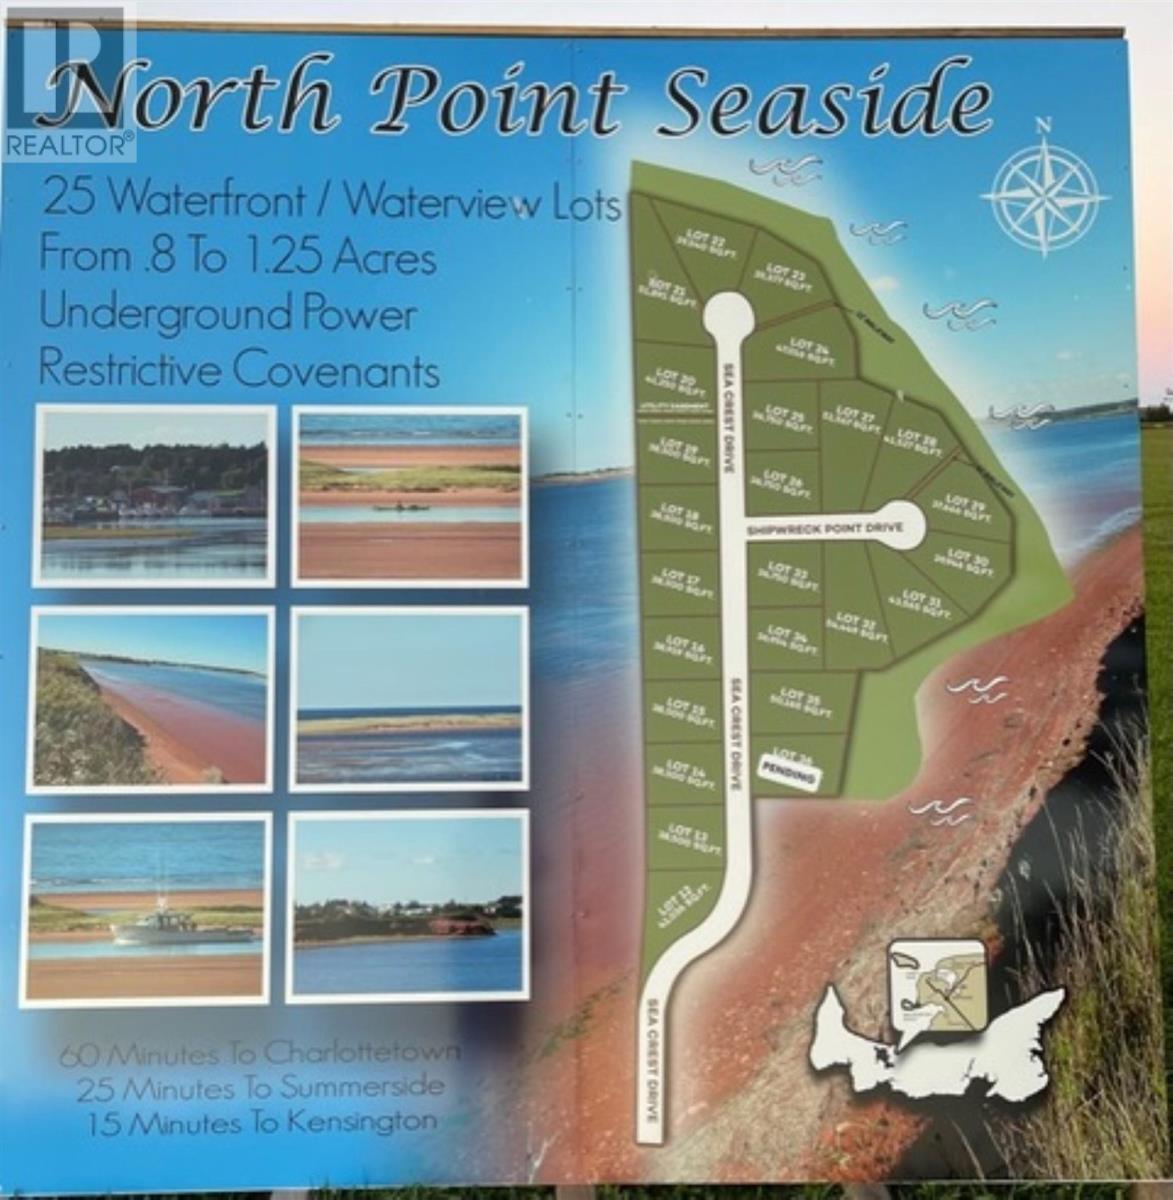 Vacant Land For Sale Lot 36 North Point Seaside, Malpeque, Prince Edward Island